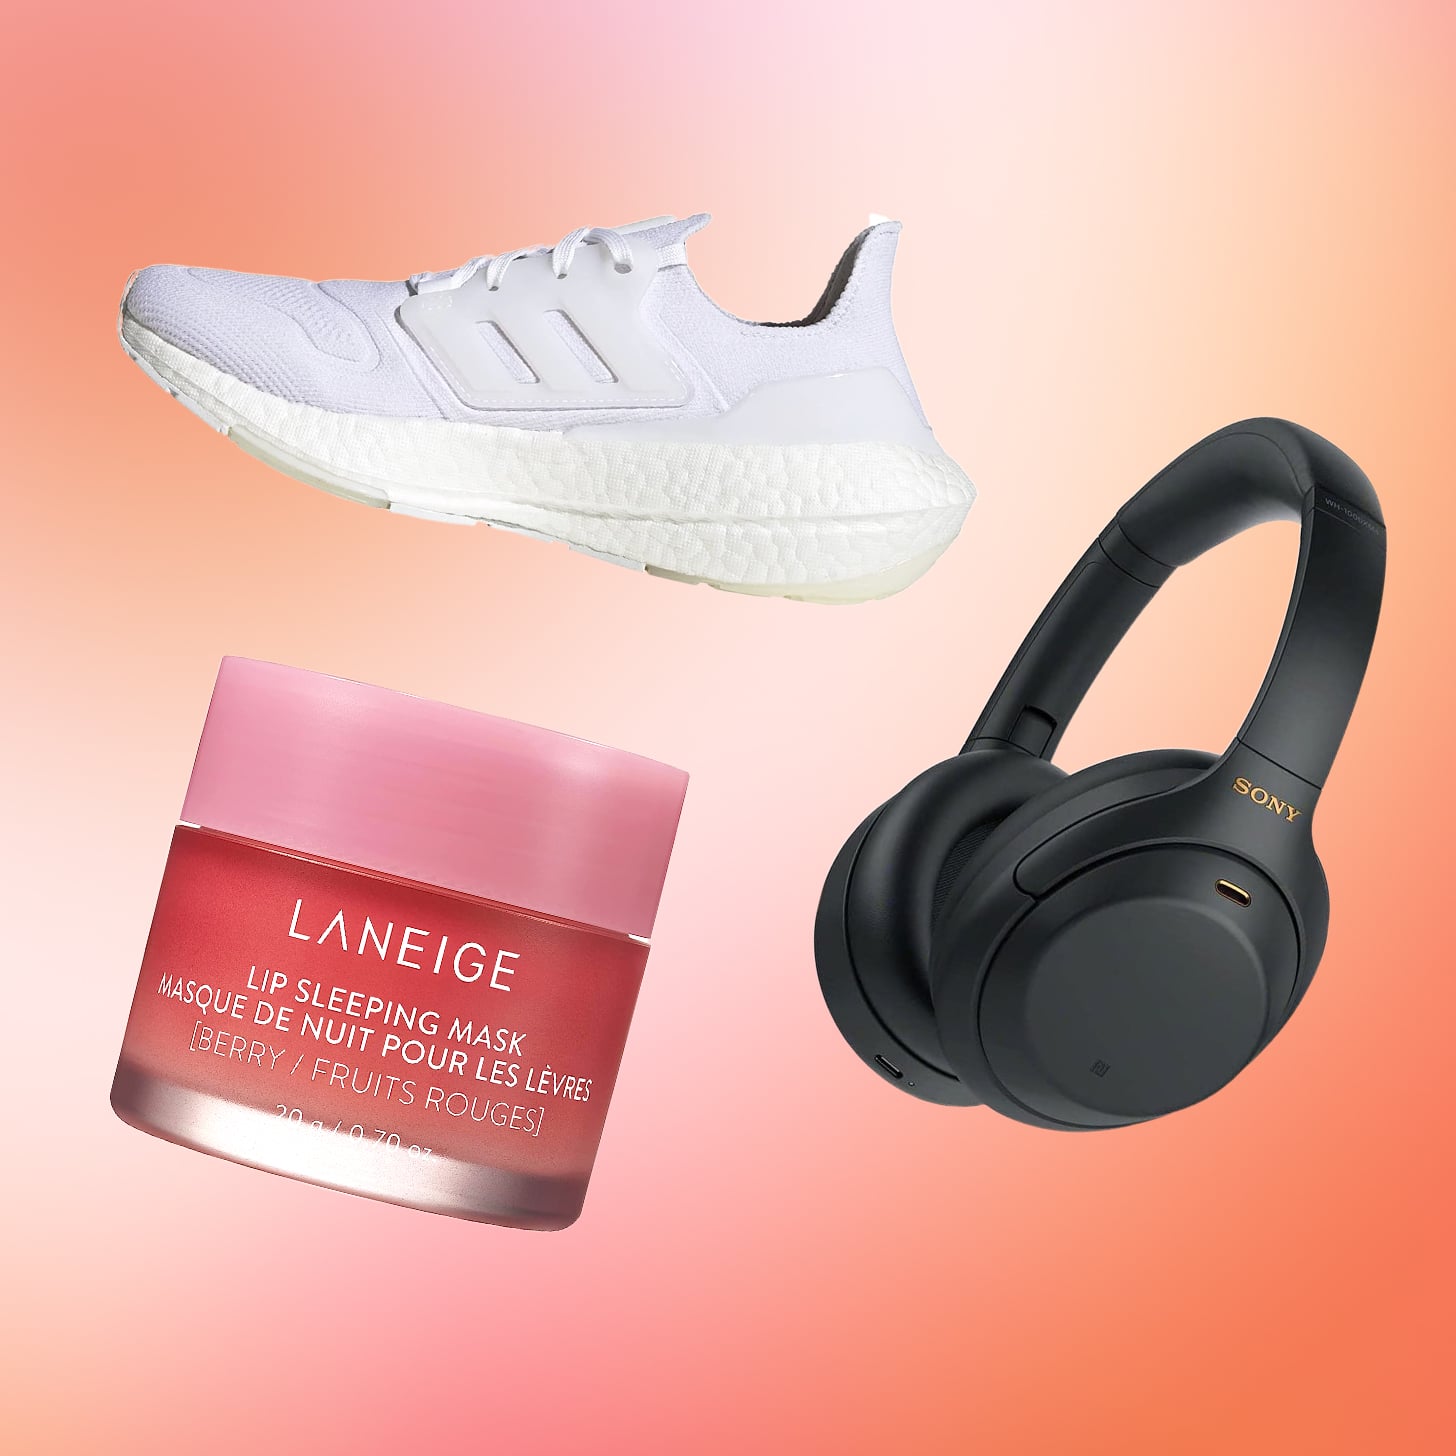 8 Best  Fashion Dupes to Shop Prime Day 2022